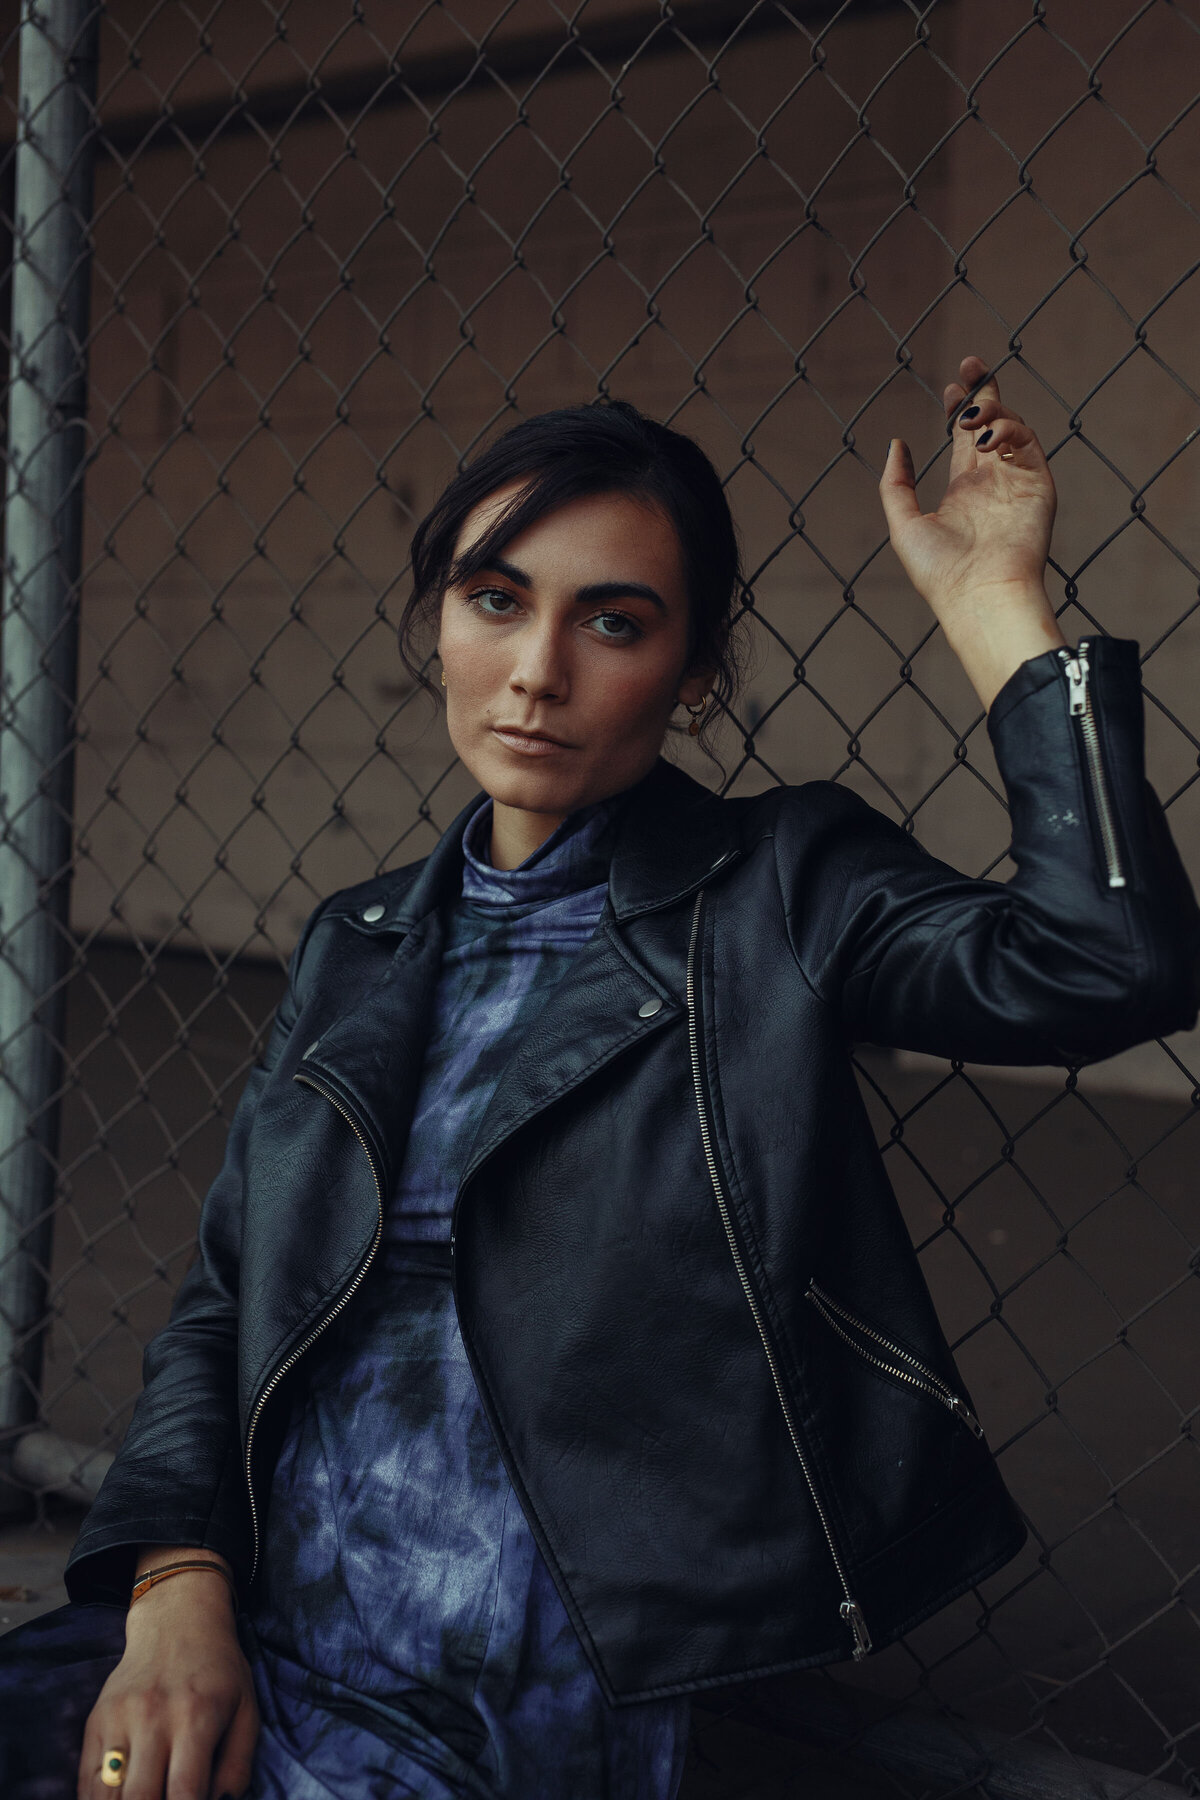 Portrait Photo Of Young Woman In Black Leather Jacket Leaning Against a Screen Gate Los Angeles